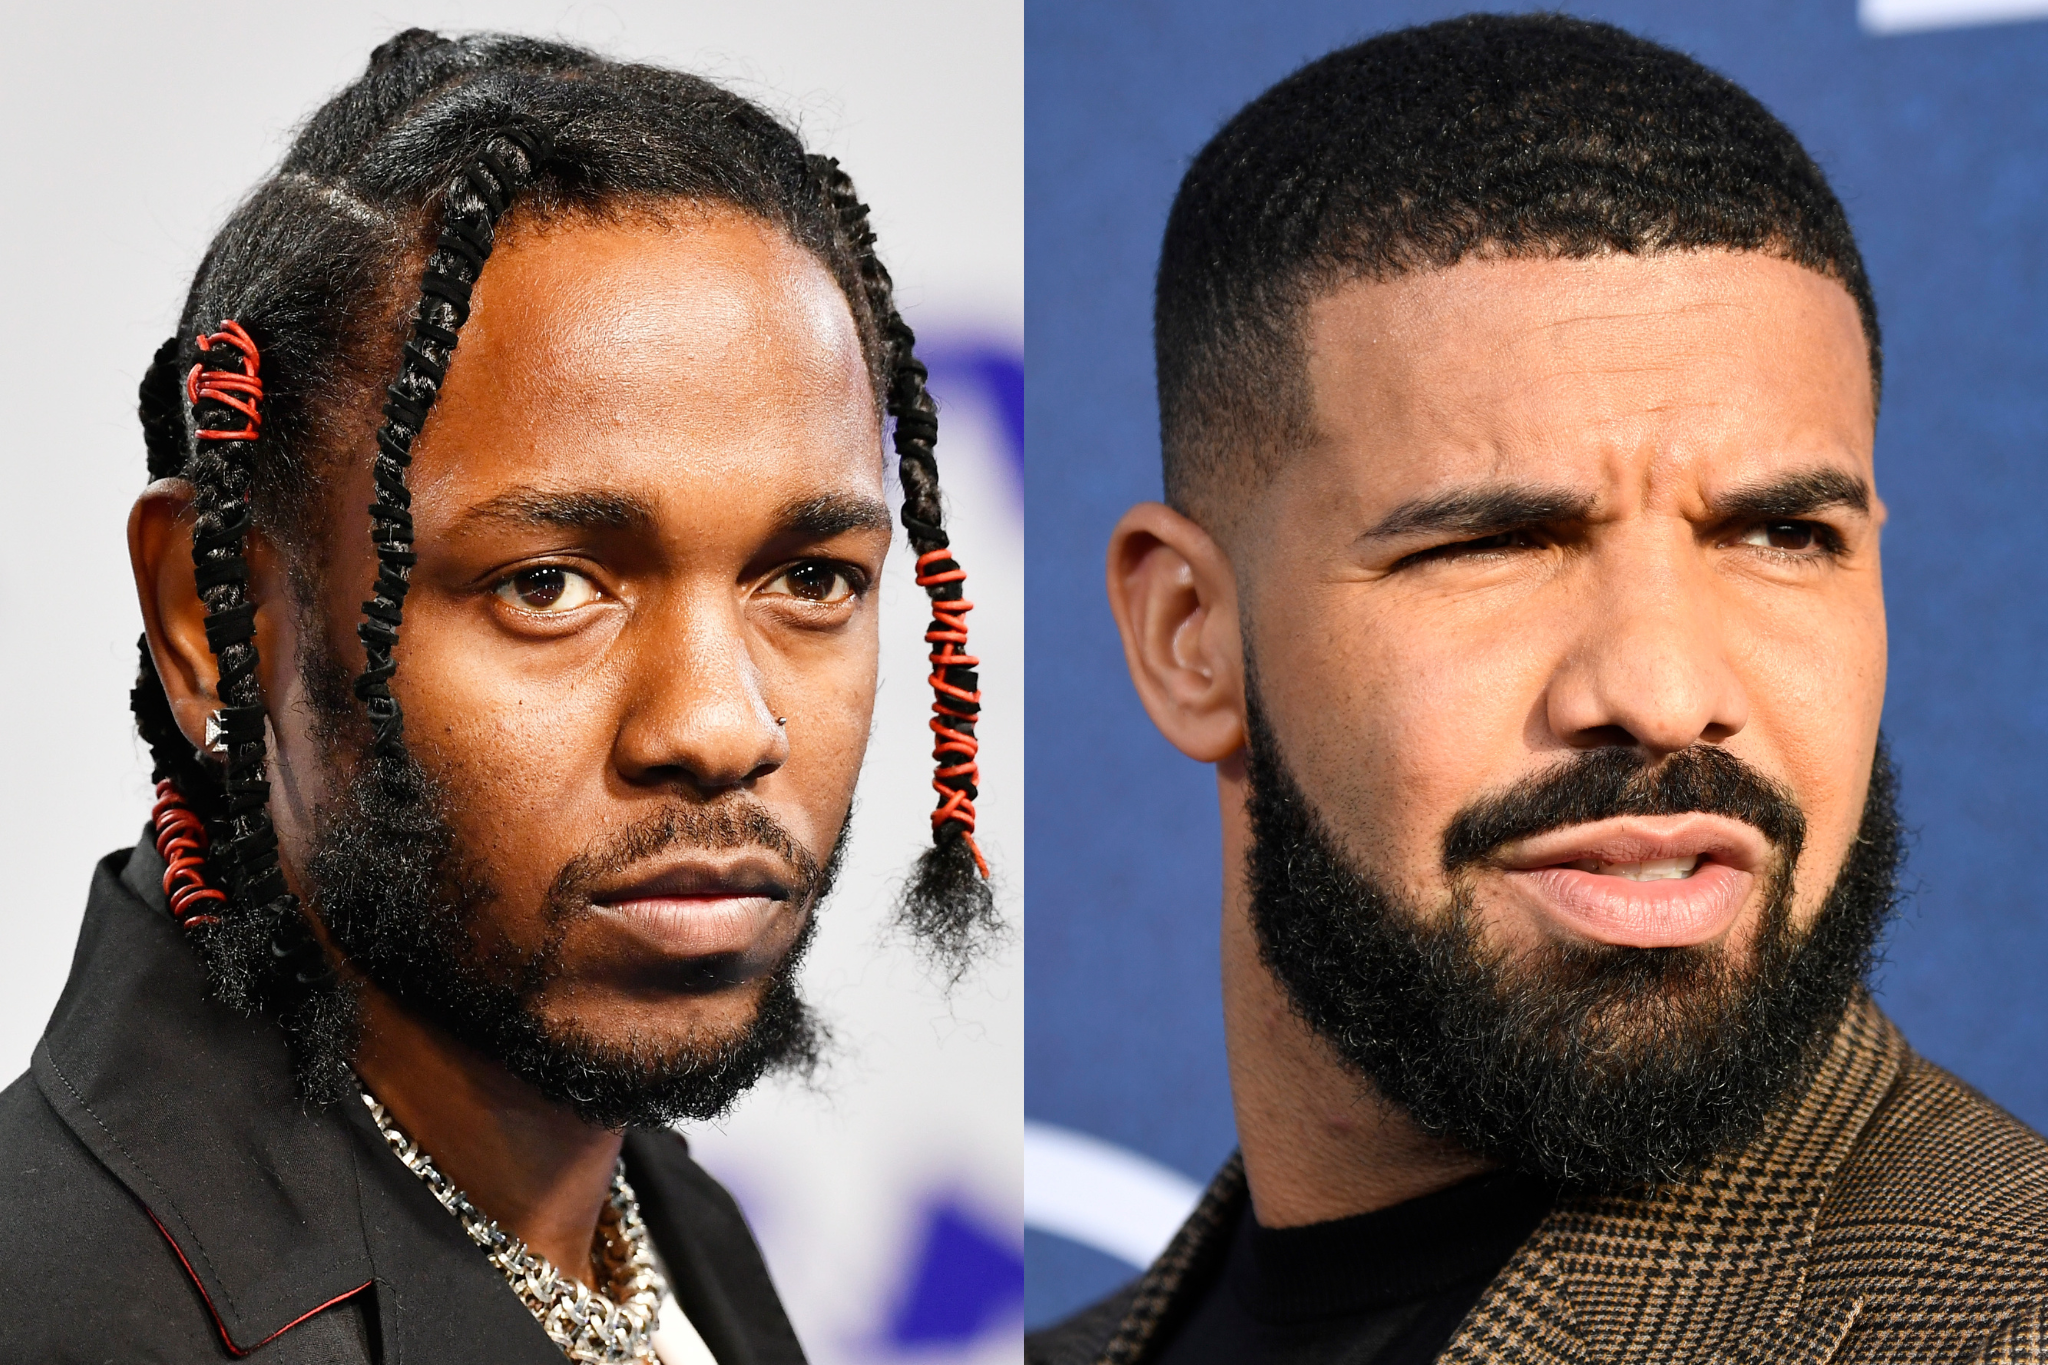 Kendrick Lamar and also-a-rapper Drake have been at each other’s throats for over a decade now